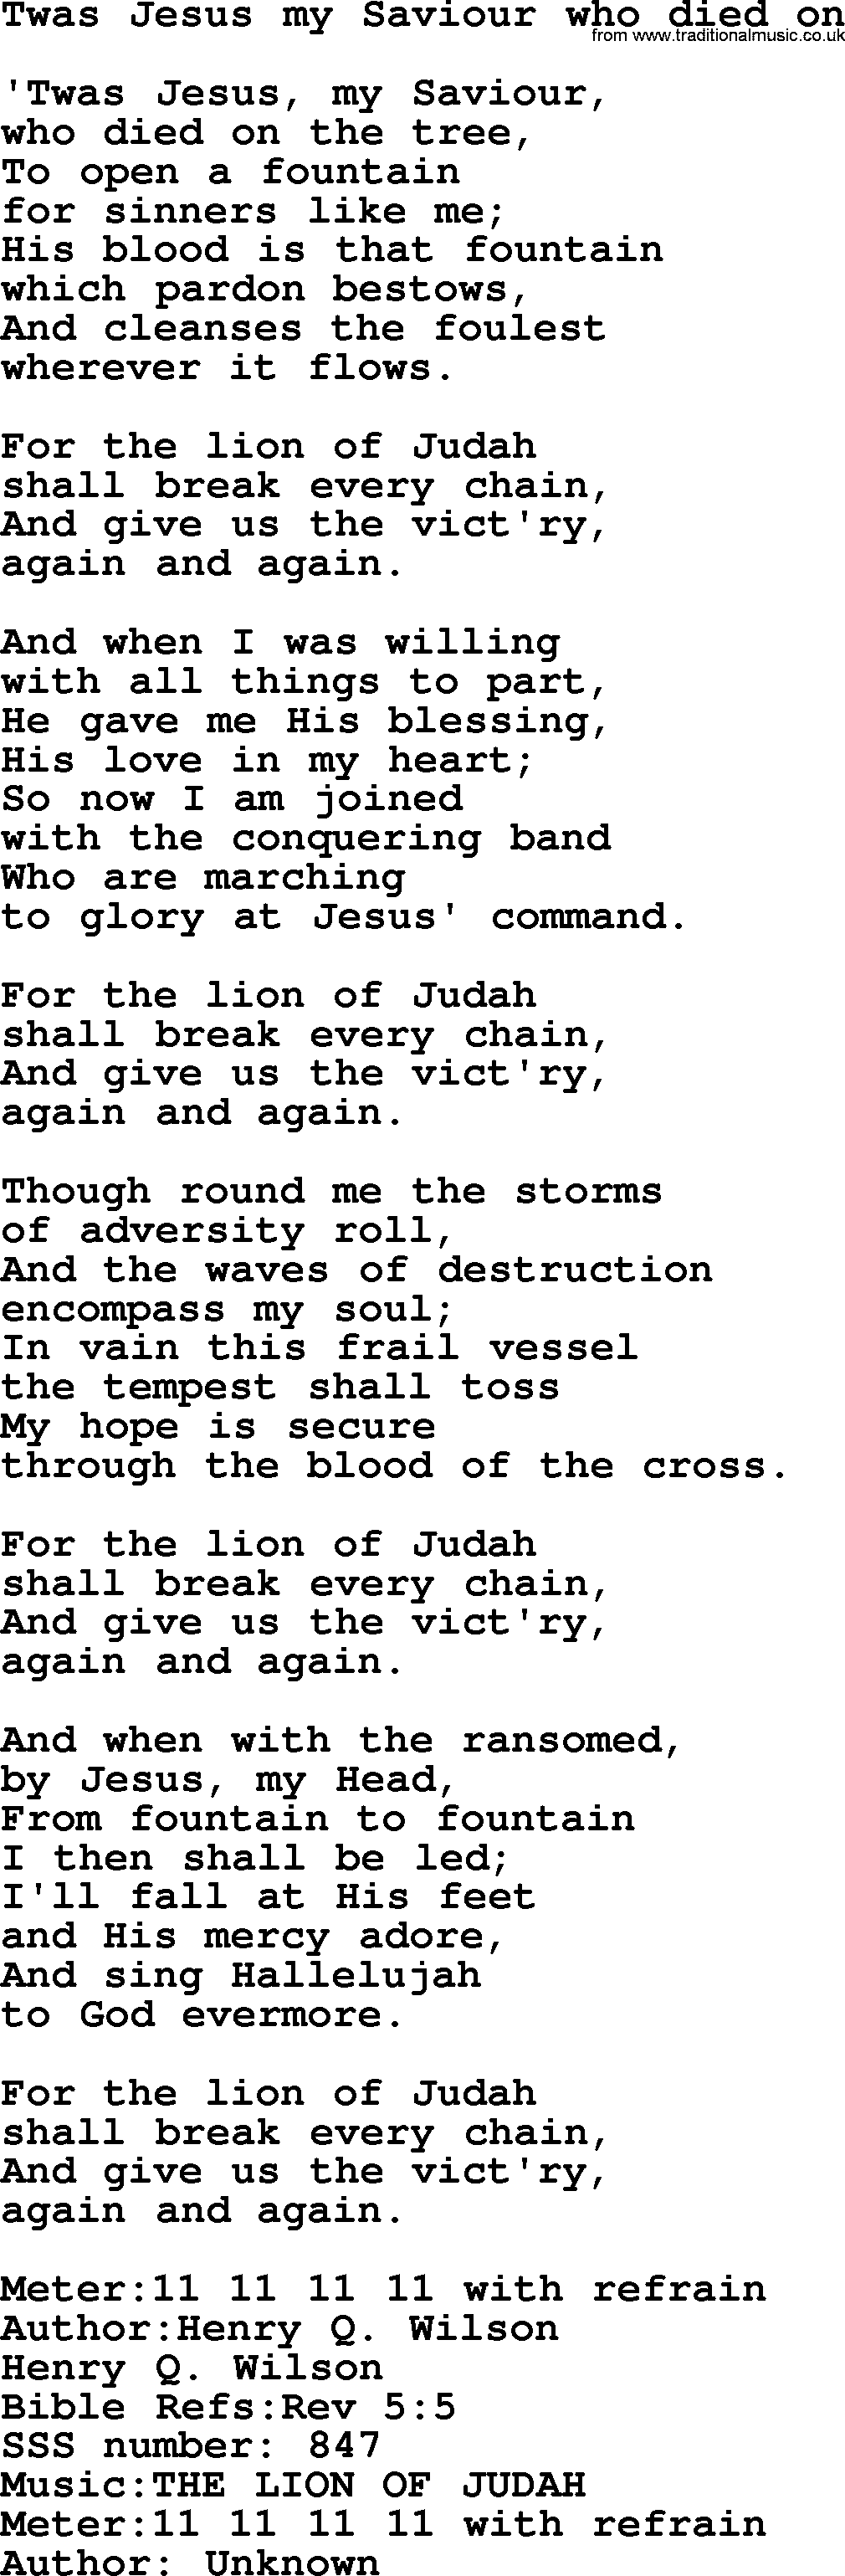 Sacred Songs and Solos complete, 1200 Hymns, title: Twas Jesus My Saviour Who Died On, lyrics and PDF